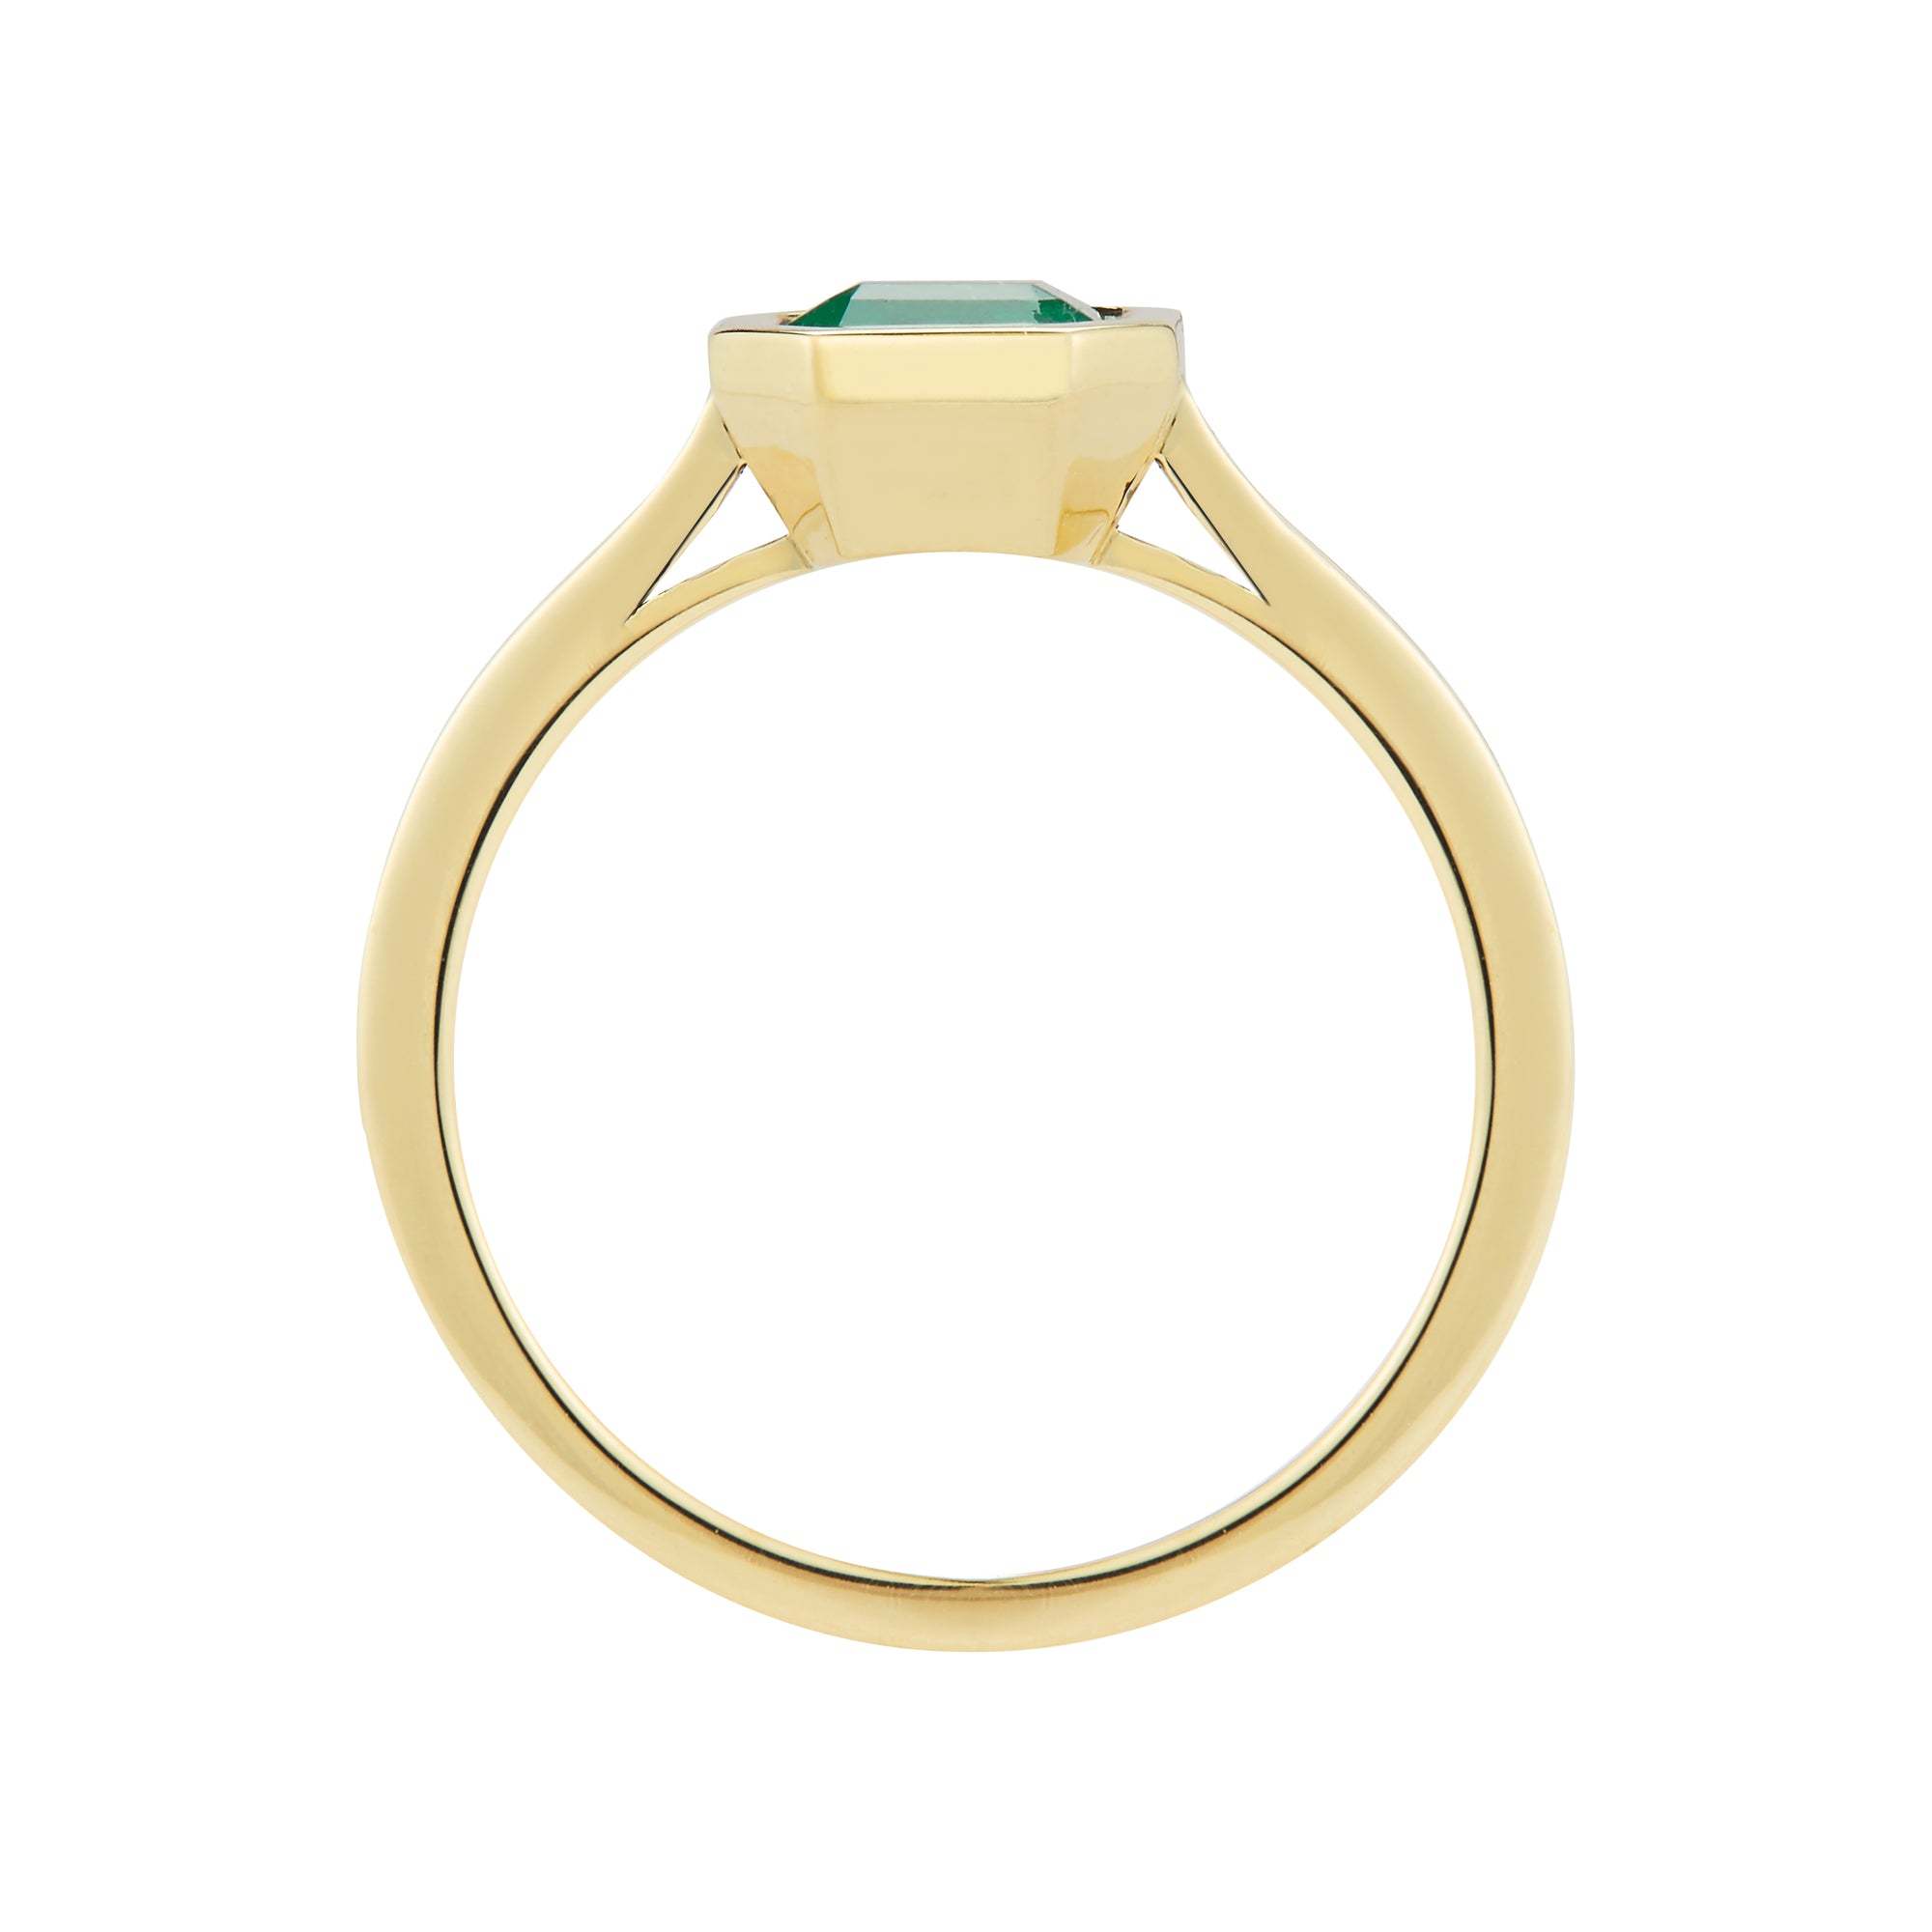 Custom Emerald Engagement Ring by Finn by Candice Pool Neistat